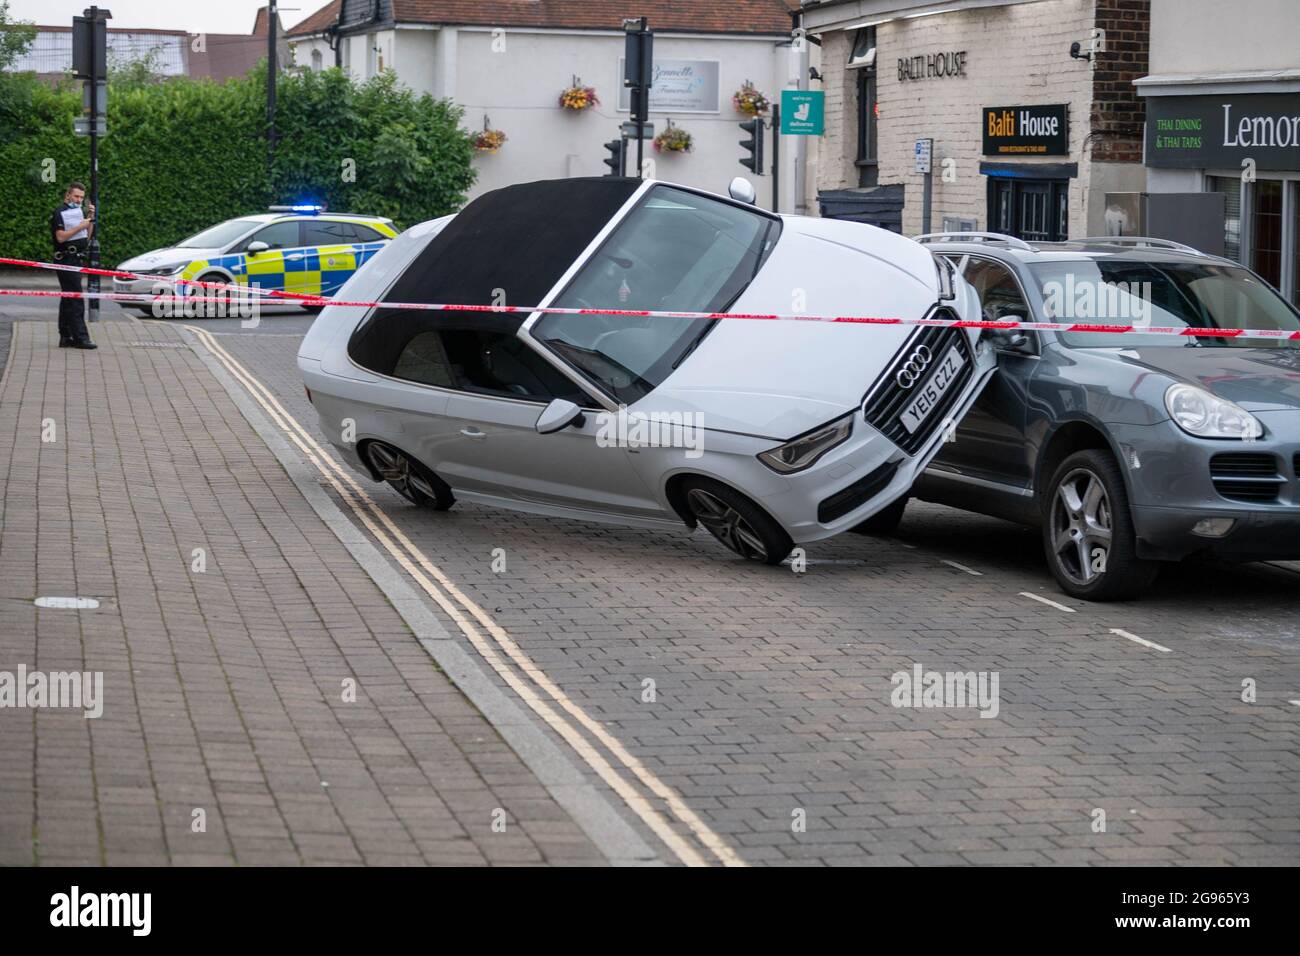 Brentwood Essex 24th July 2021 Road Traffic accident, Hart Street, Brentwood Essex,  A woman, Emma Turner 21, has been arrested and charged with drunk driving Credit: Ian Davidson/Alamy Live News Stock Photo